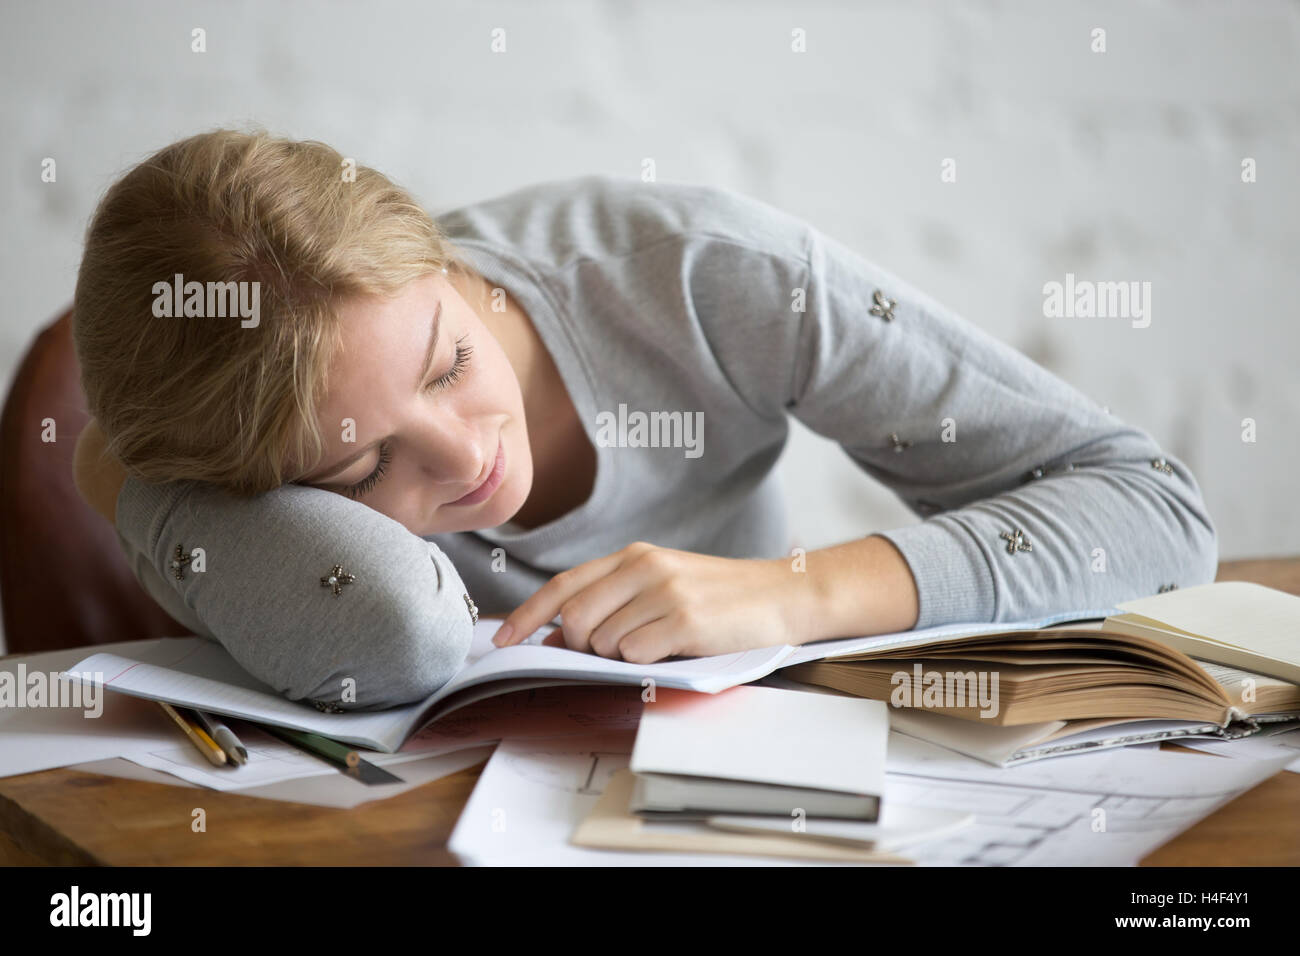 Portrait of a student girl sleeping at the desk Stock Photo